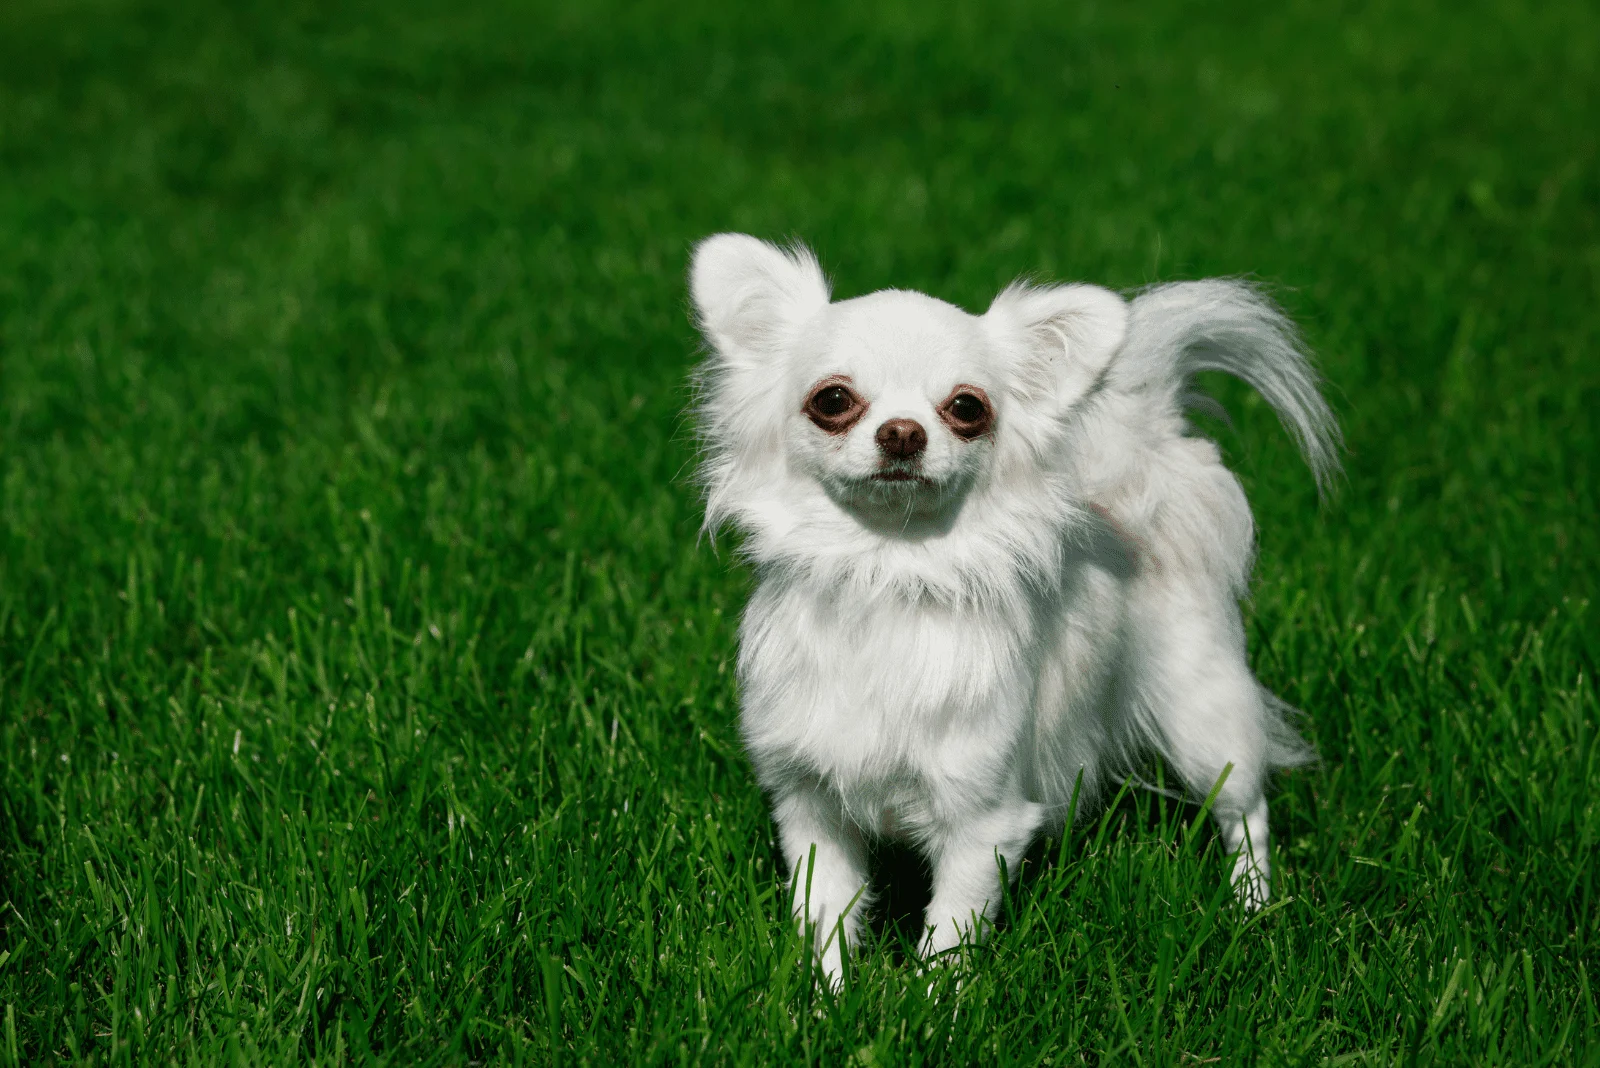 White Chihuahua standing in green grass